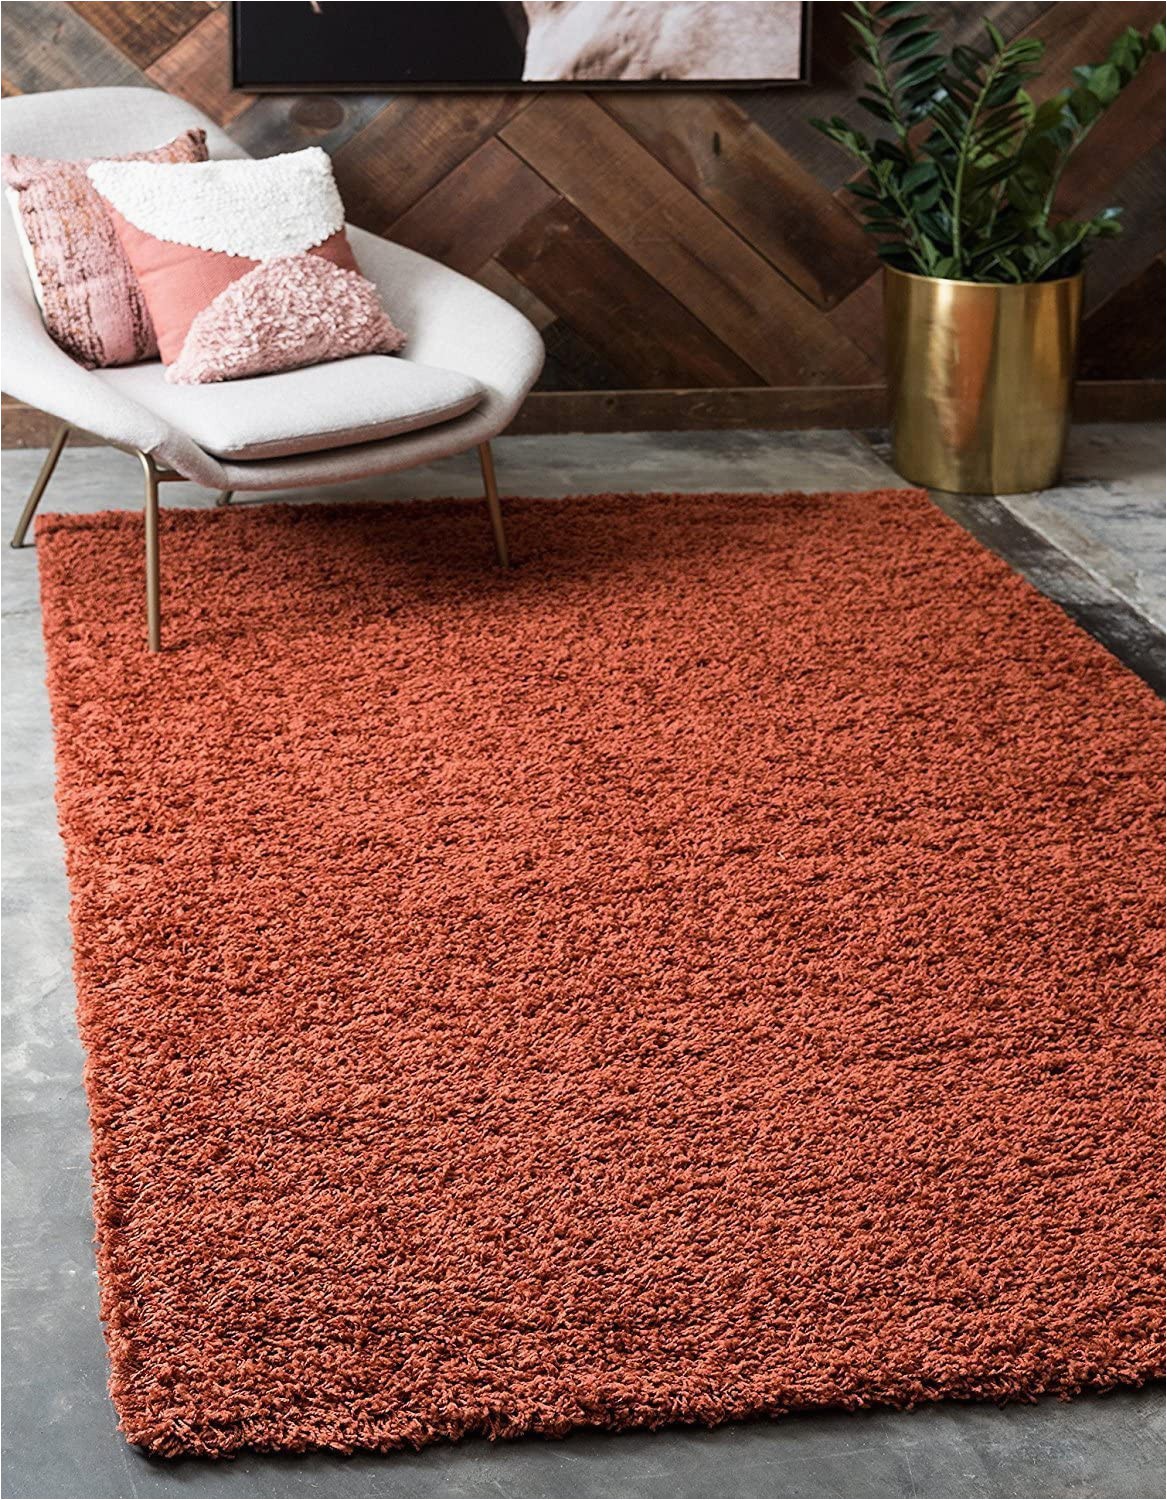 Extra Large area Rugs Amazon Bravich Rugmasters Terracotta orange Extra Extra Rug 5 Cm Thick Shag Pile soft Shaggy area Rugs Modern Carpet Living Room Bedroom Mats 200 X 290